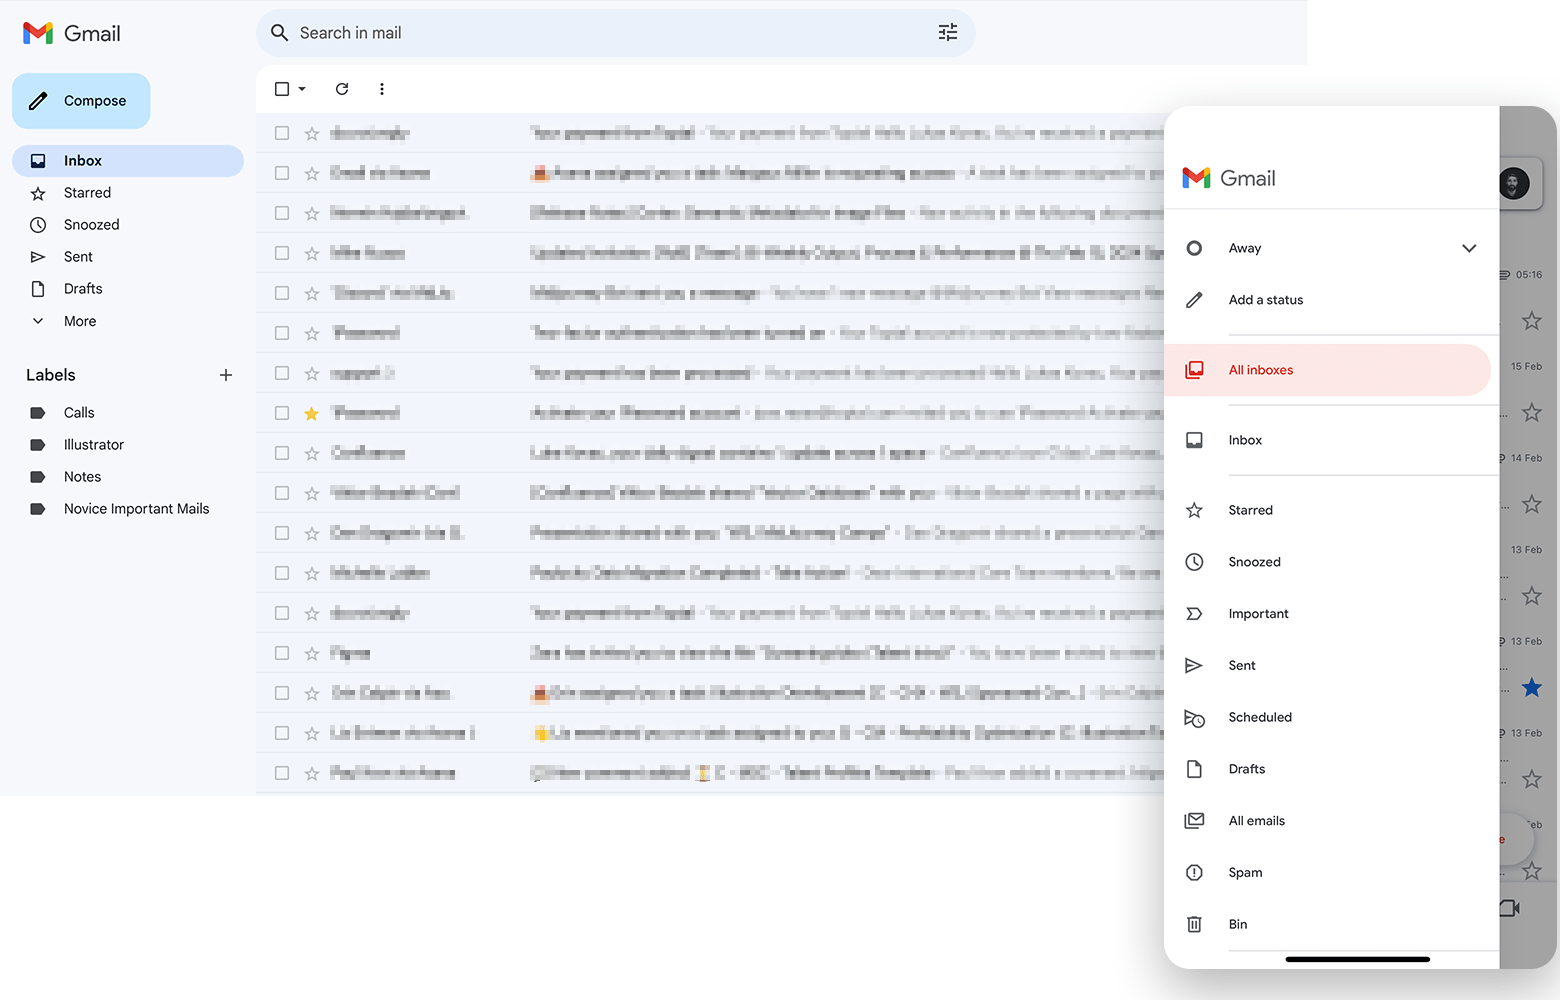 A comparative view of Gmail for desktop and mobile, both with side navigation.